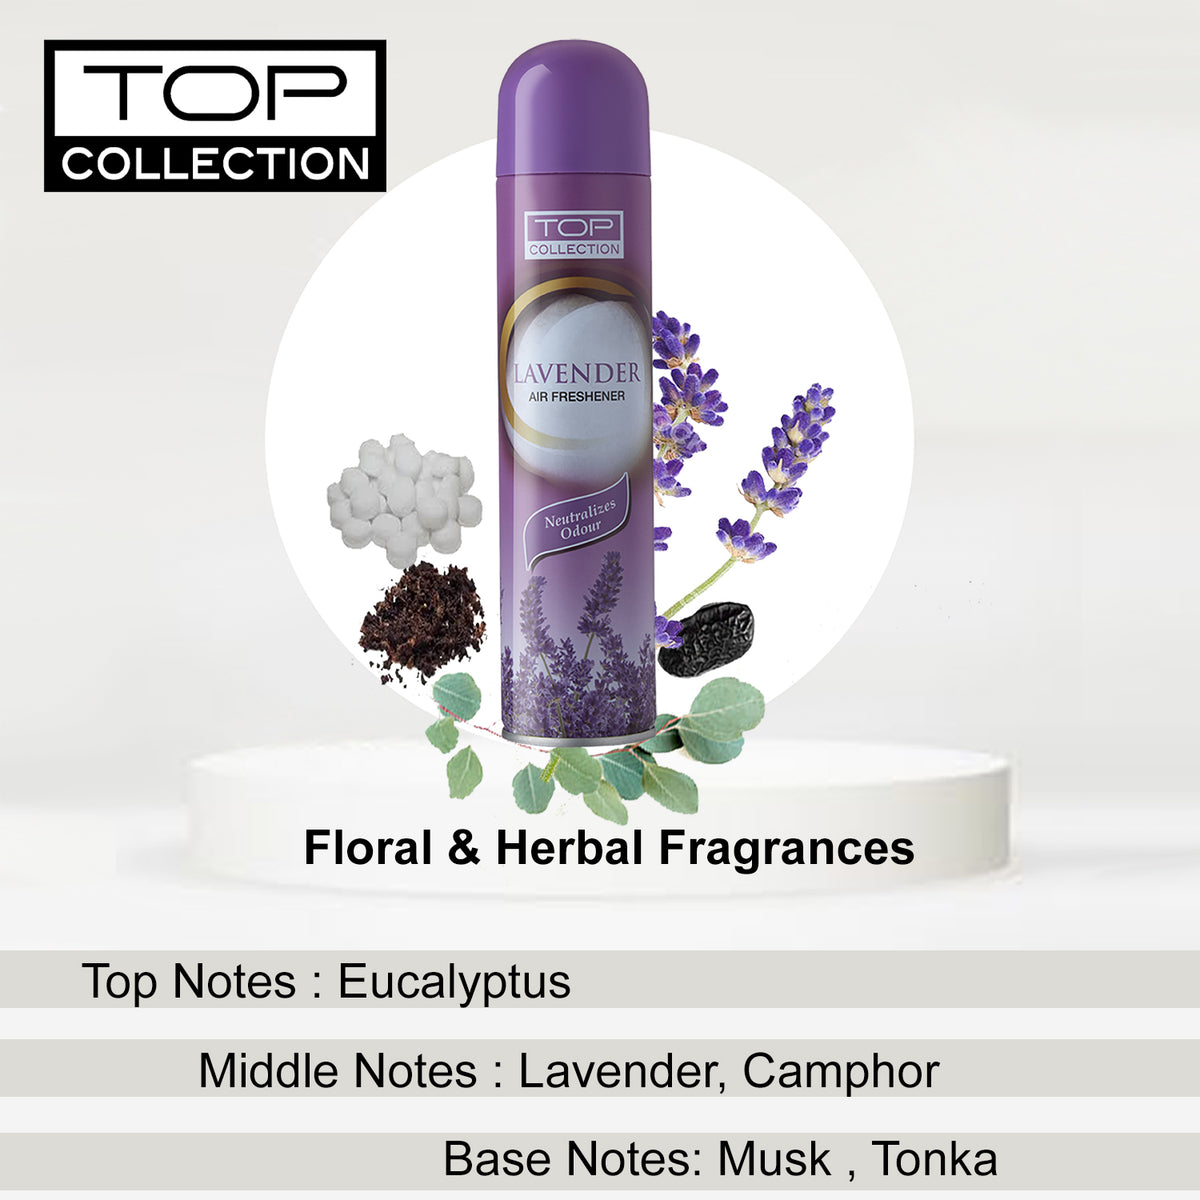 Top Collection Air Freshener - Lavender, 300ml